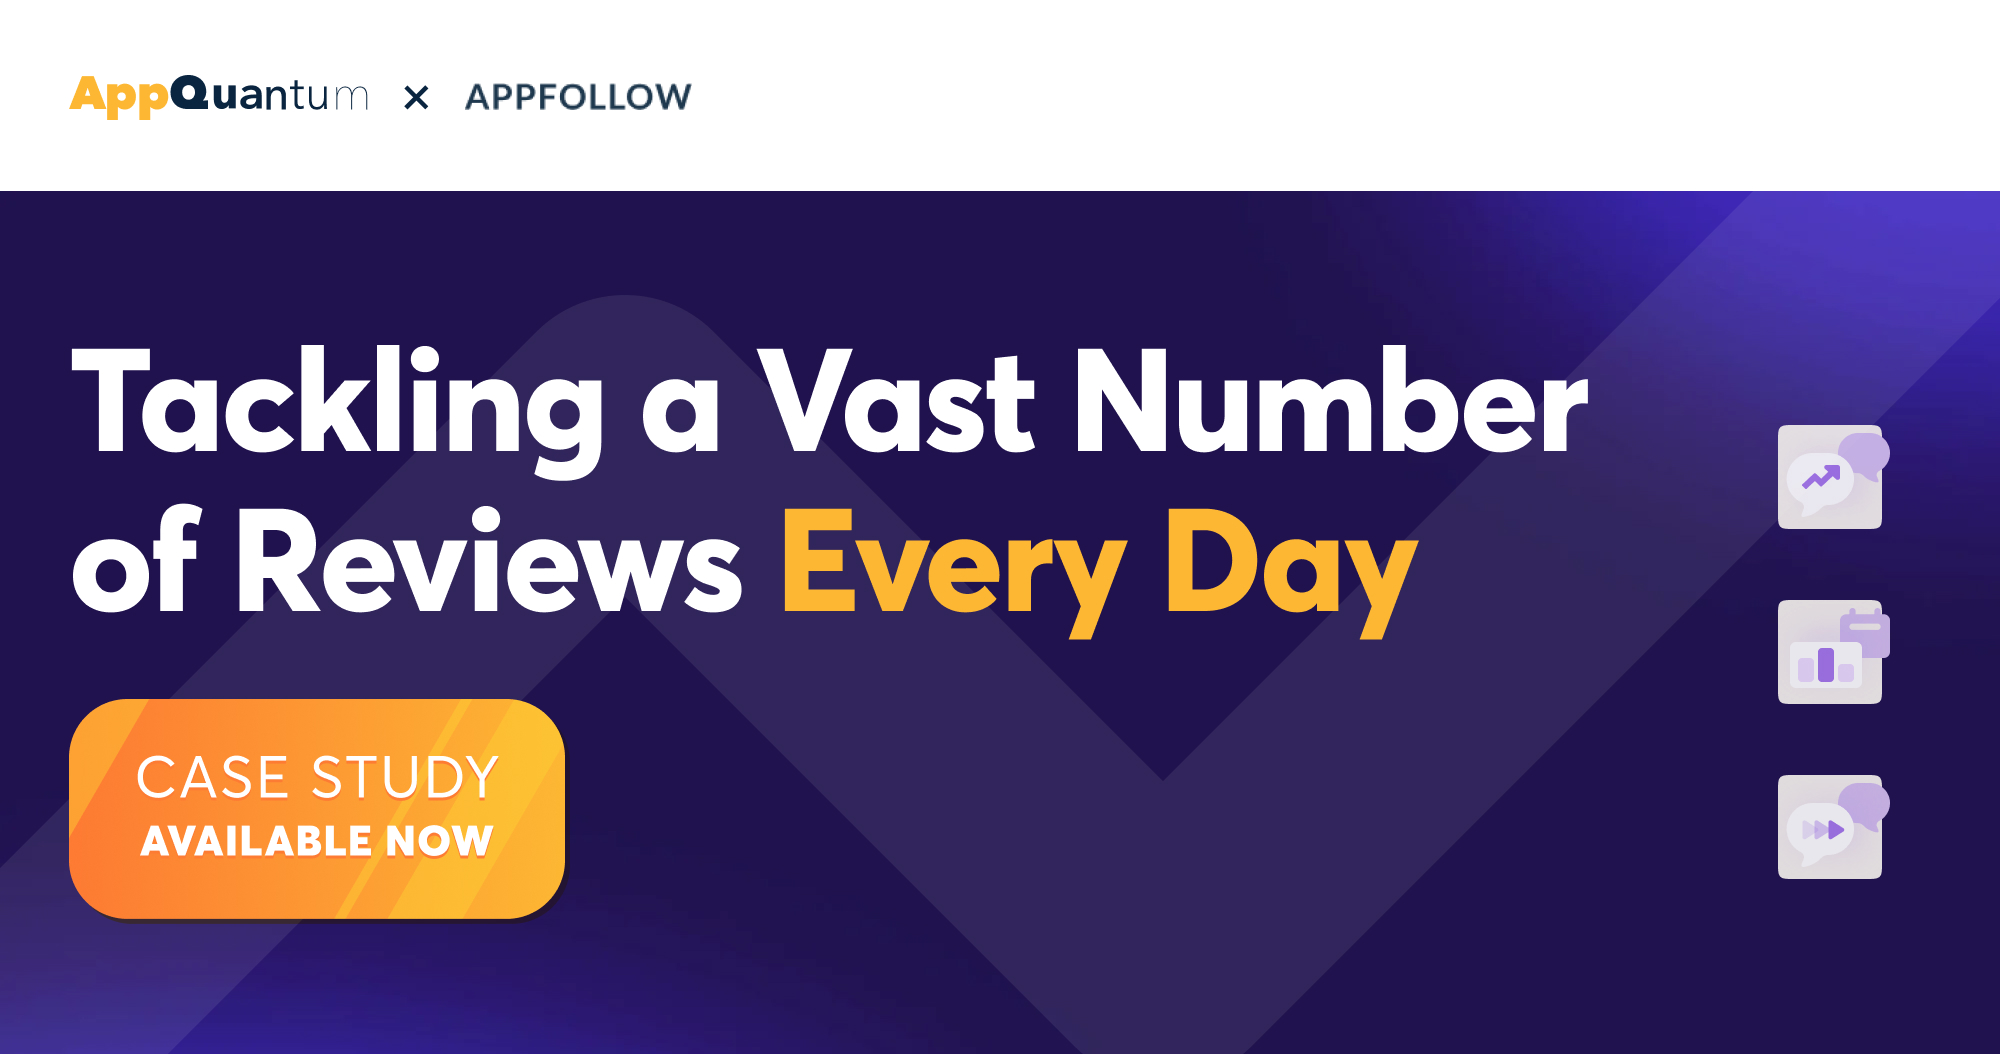 AppQuantum x AppFollow Case Study: Tackling a Vast Number of Reviews Every Day